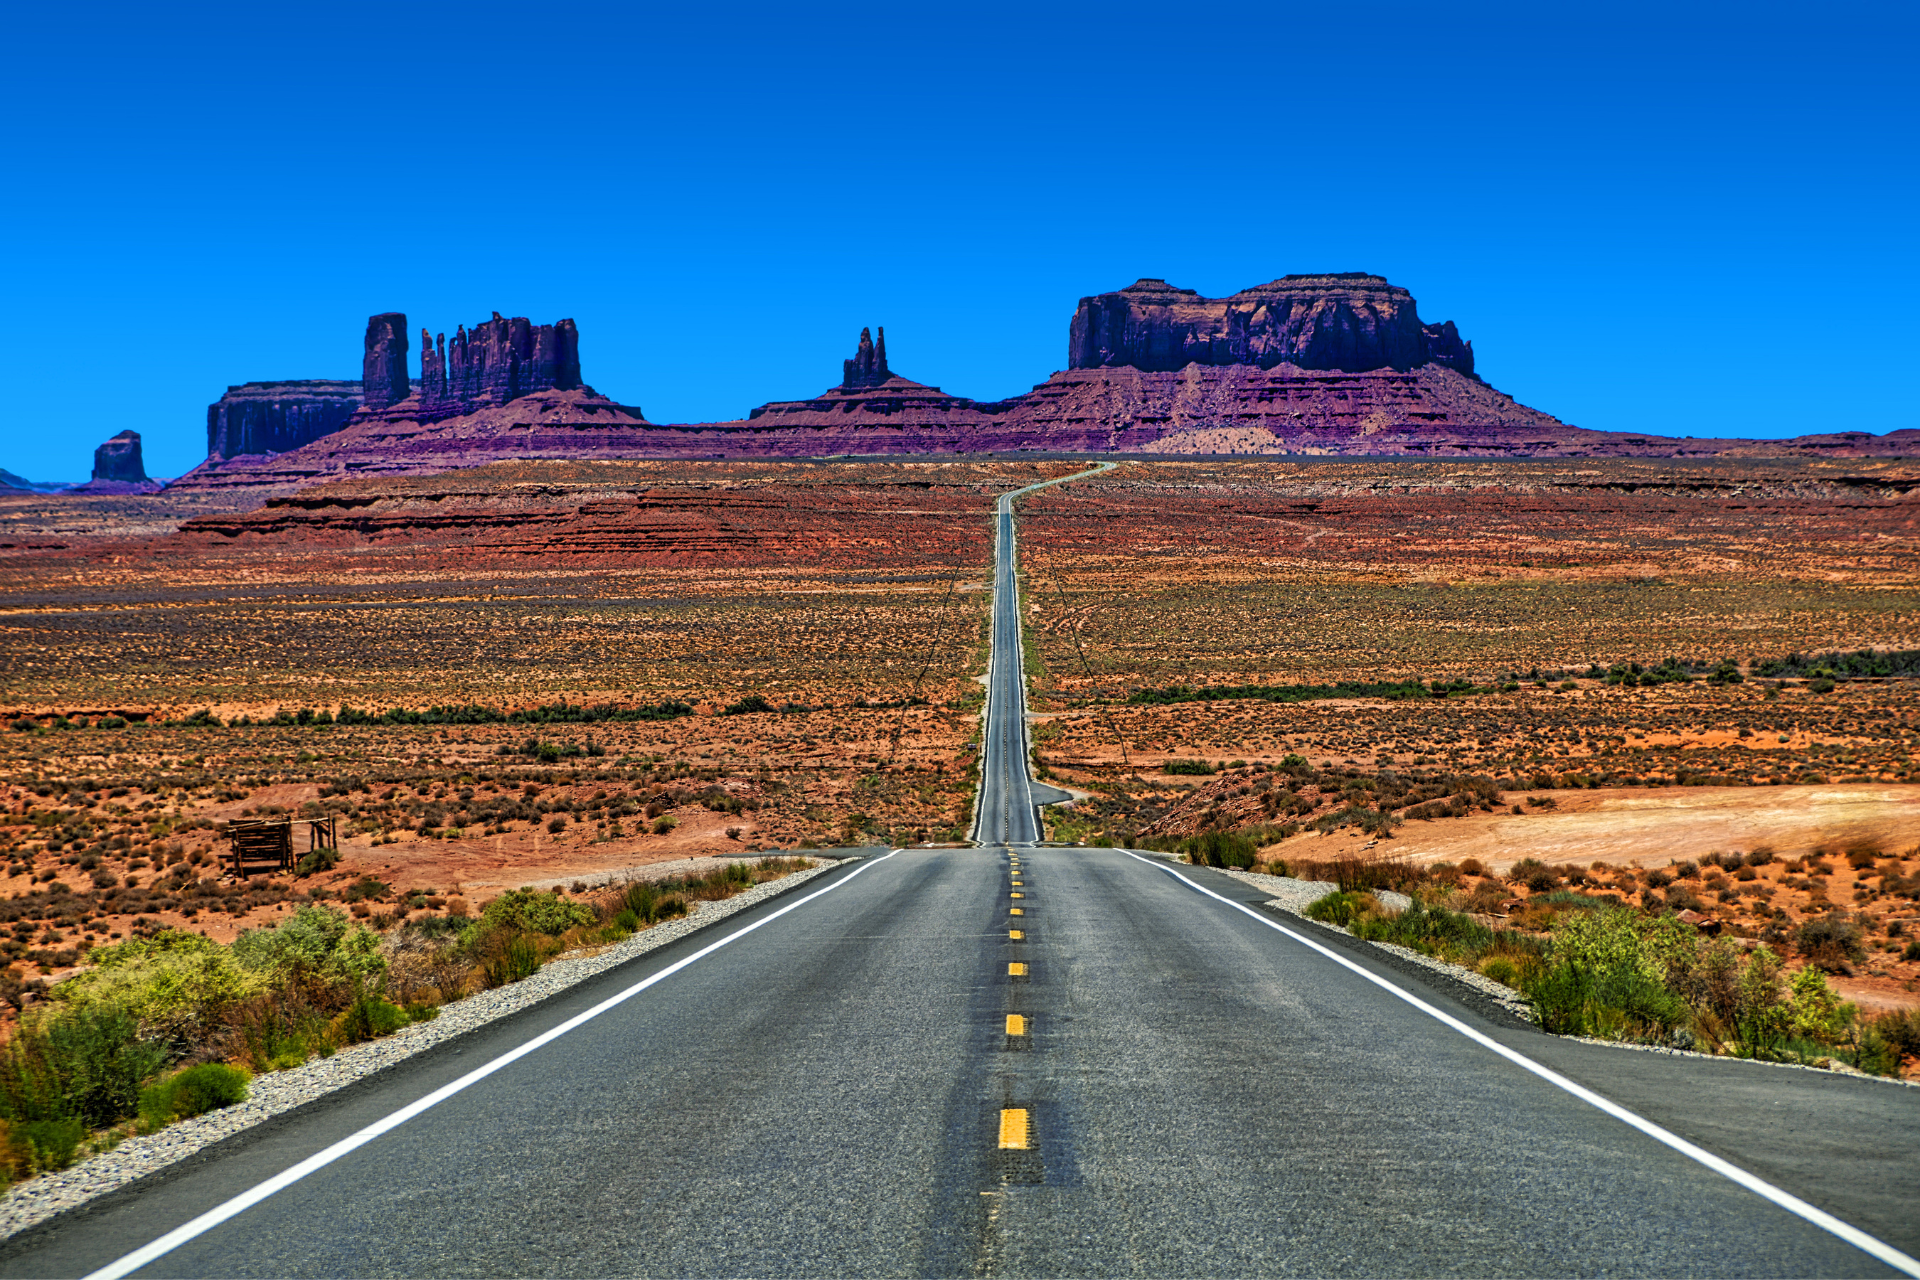 Monument Valley Arizona is a great place to go after you get your medical marijuana card